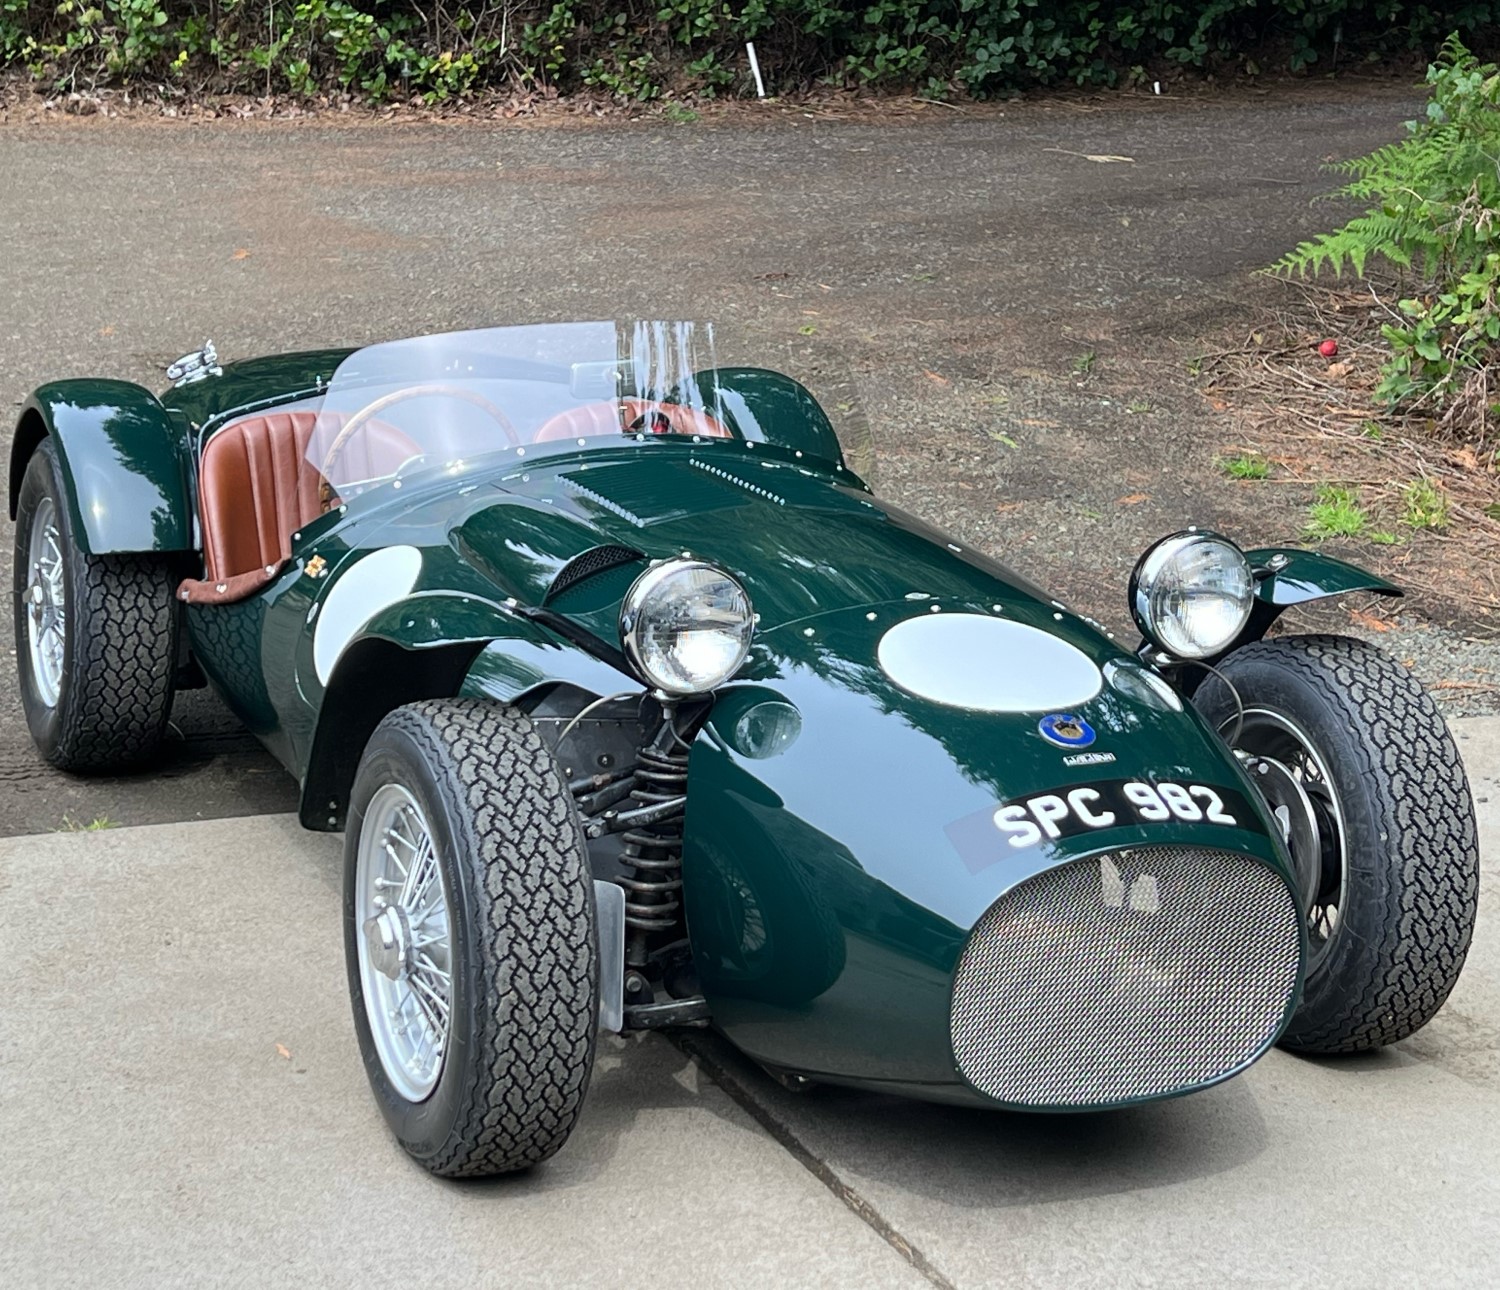 One-off Jaguar Based Racecar - Full Customized Build from the ground up with Diamond Woven Mesh Grille